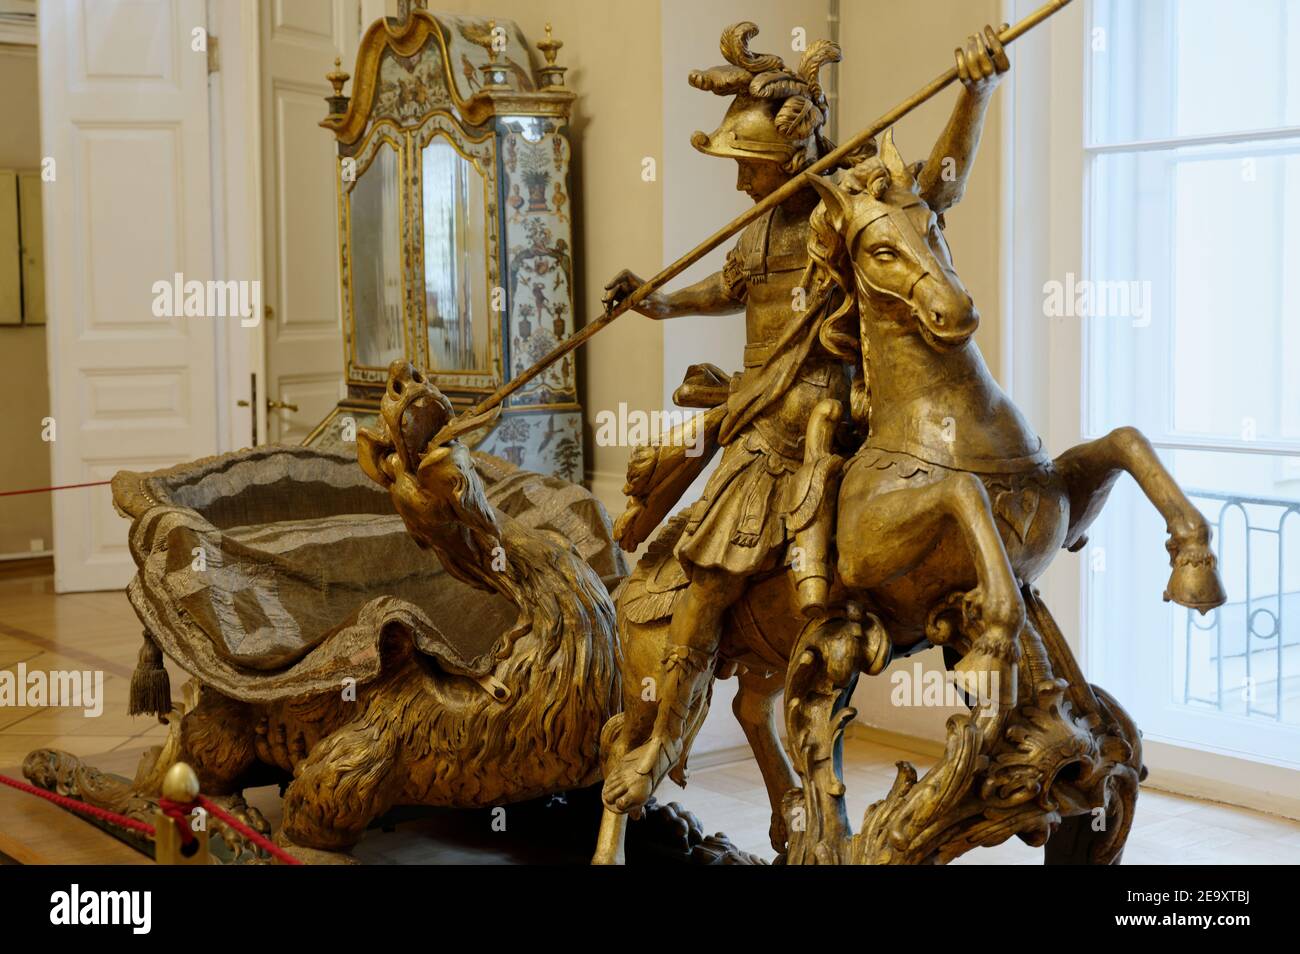 Carnival sleigh with the Figurine of St George in the exhibition of 18th century Russian culture in Winter Palace, the State Hermitage museum, St. Petersburg, Russia Stock Photo